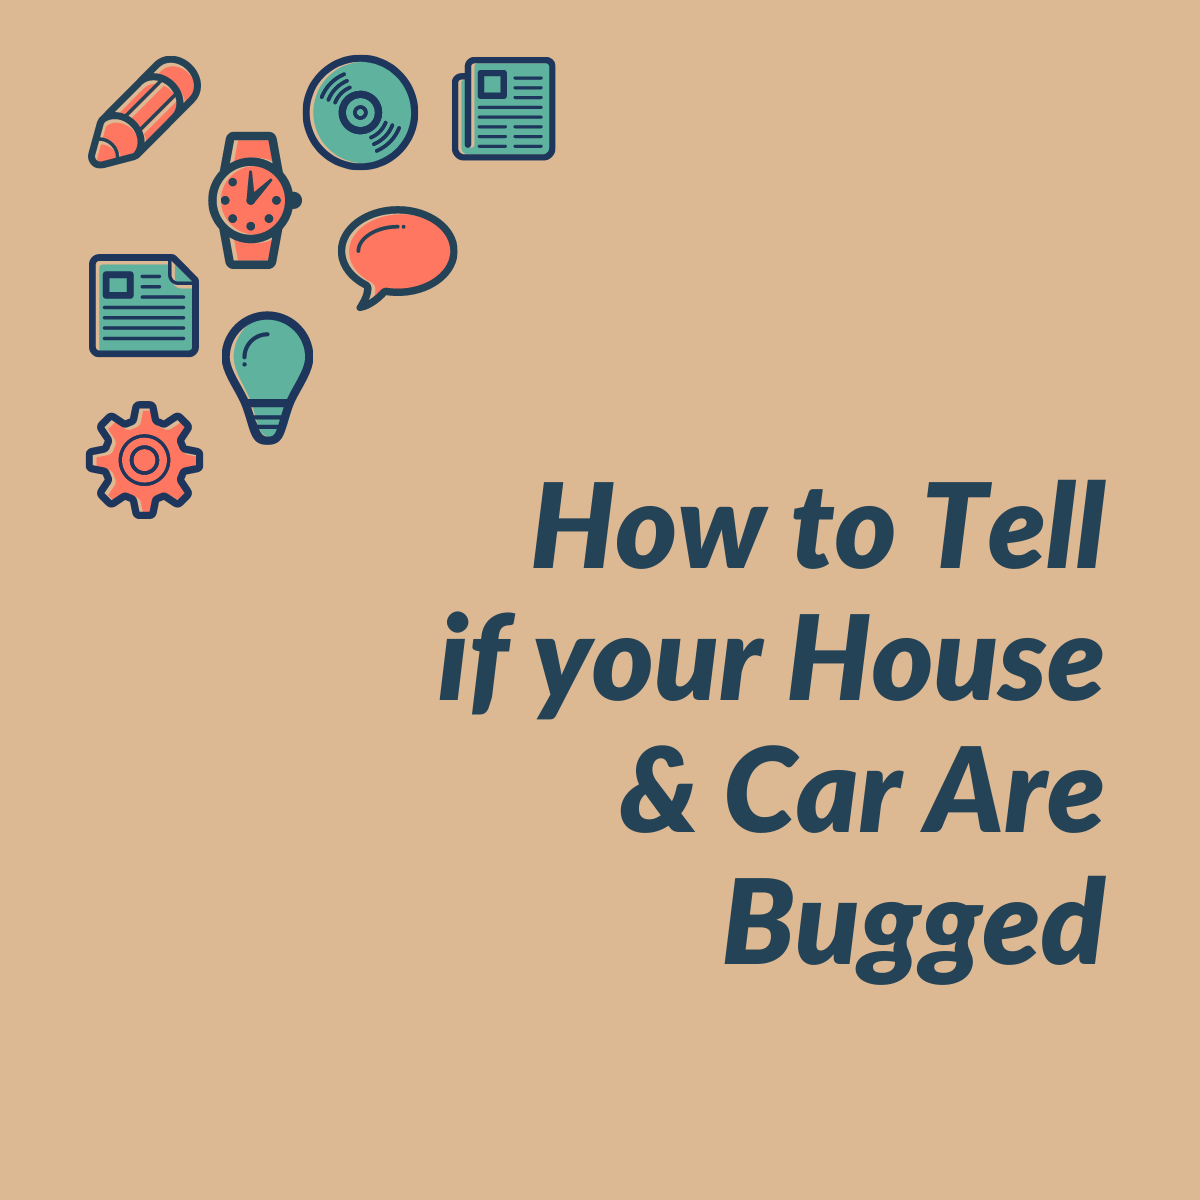 https://dropinblog.net/34238069/files/featured/How_to_Tell_if_your_House__amp__Car_Are_Bugged.png